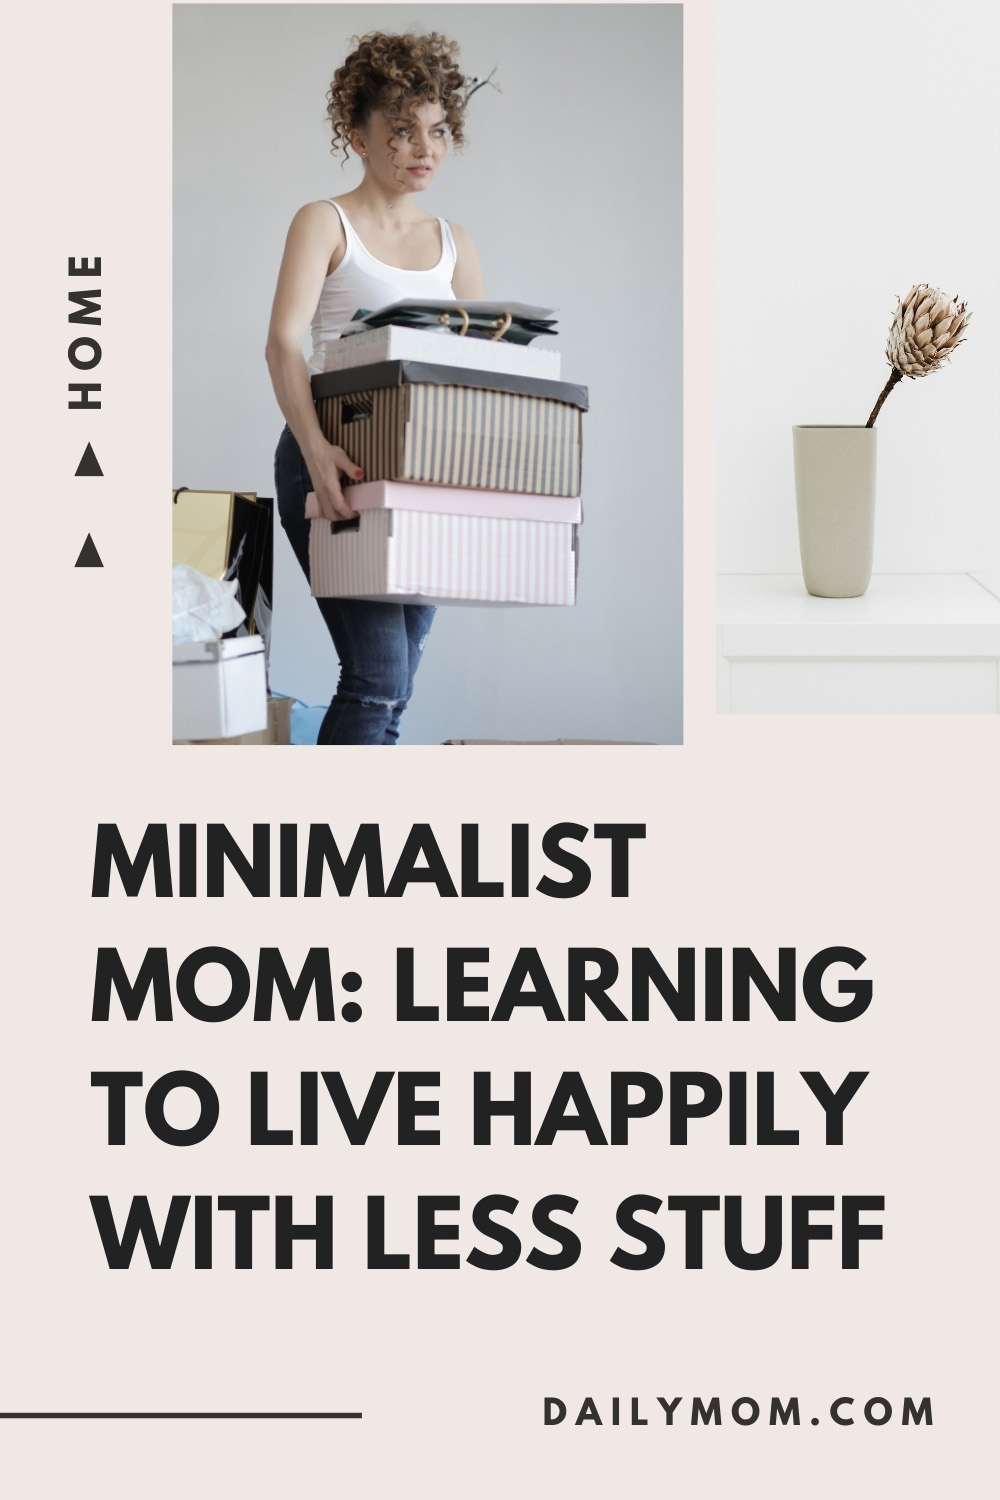 Minimalist Mom Living Happily With Less Stuff » Read Now!